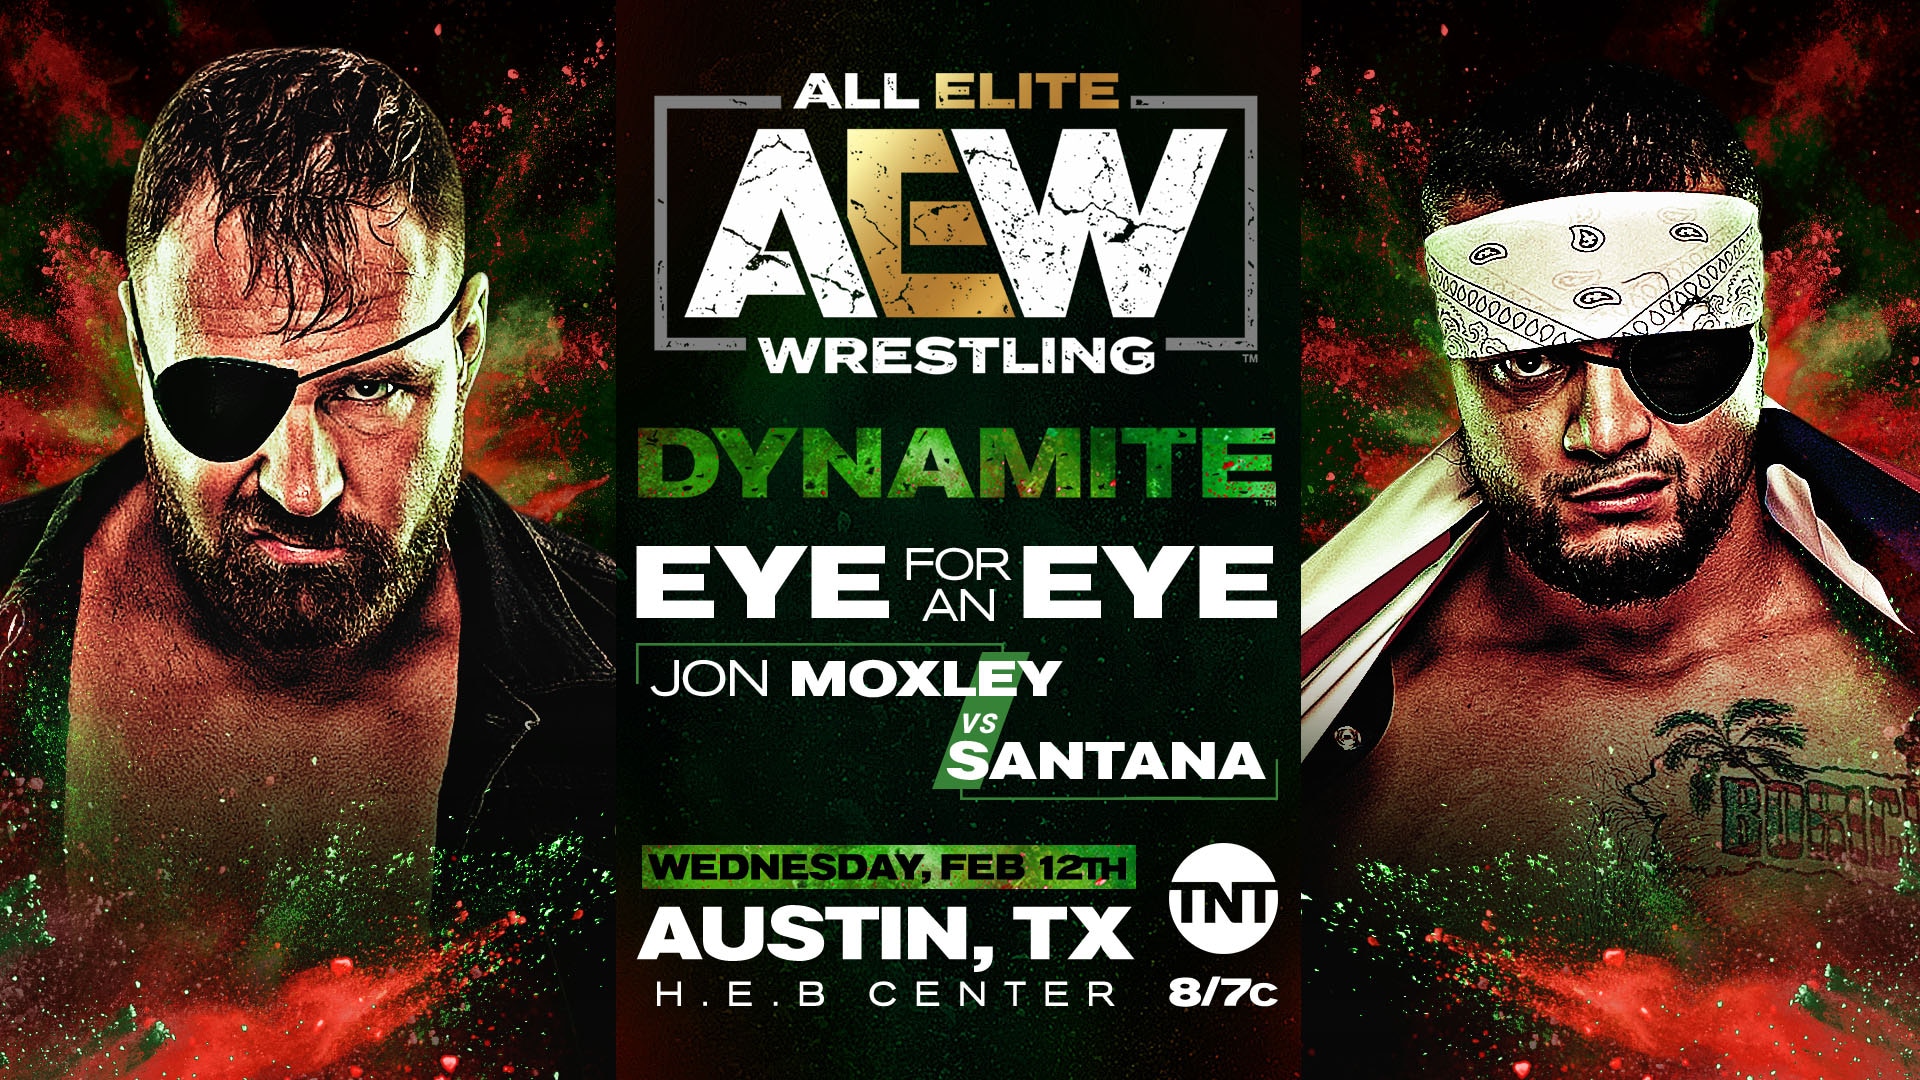 eye for an eye match between Moxley and Santana